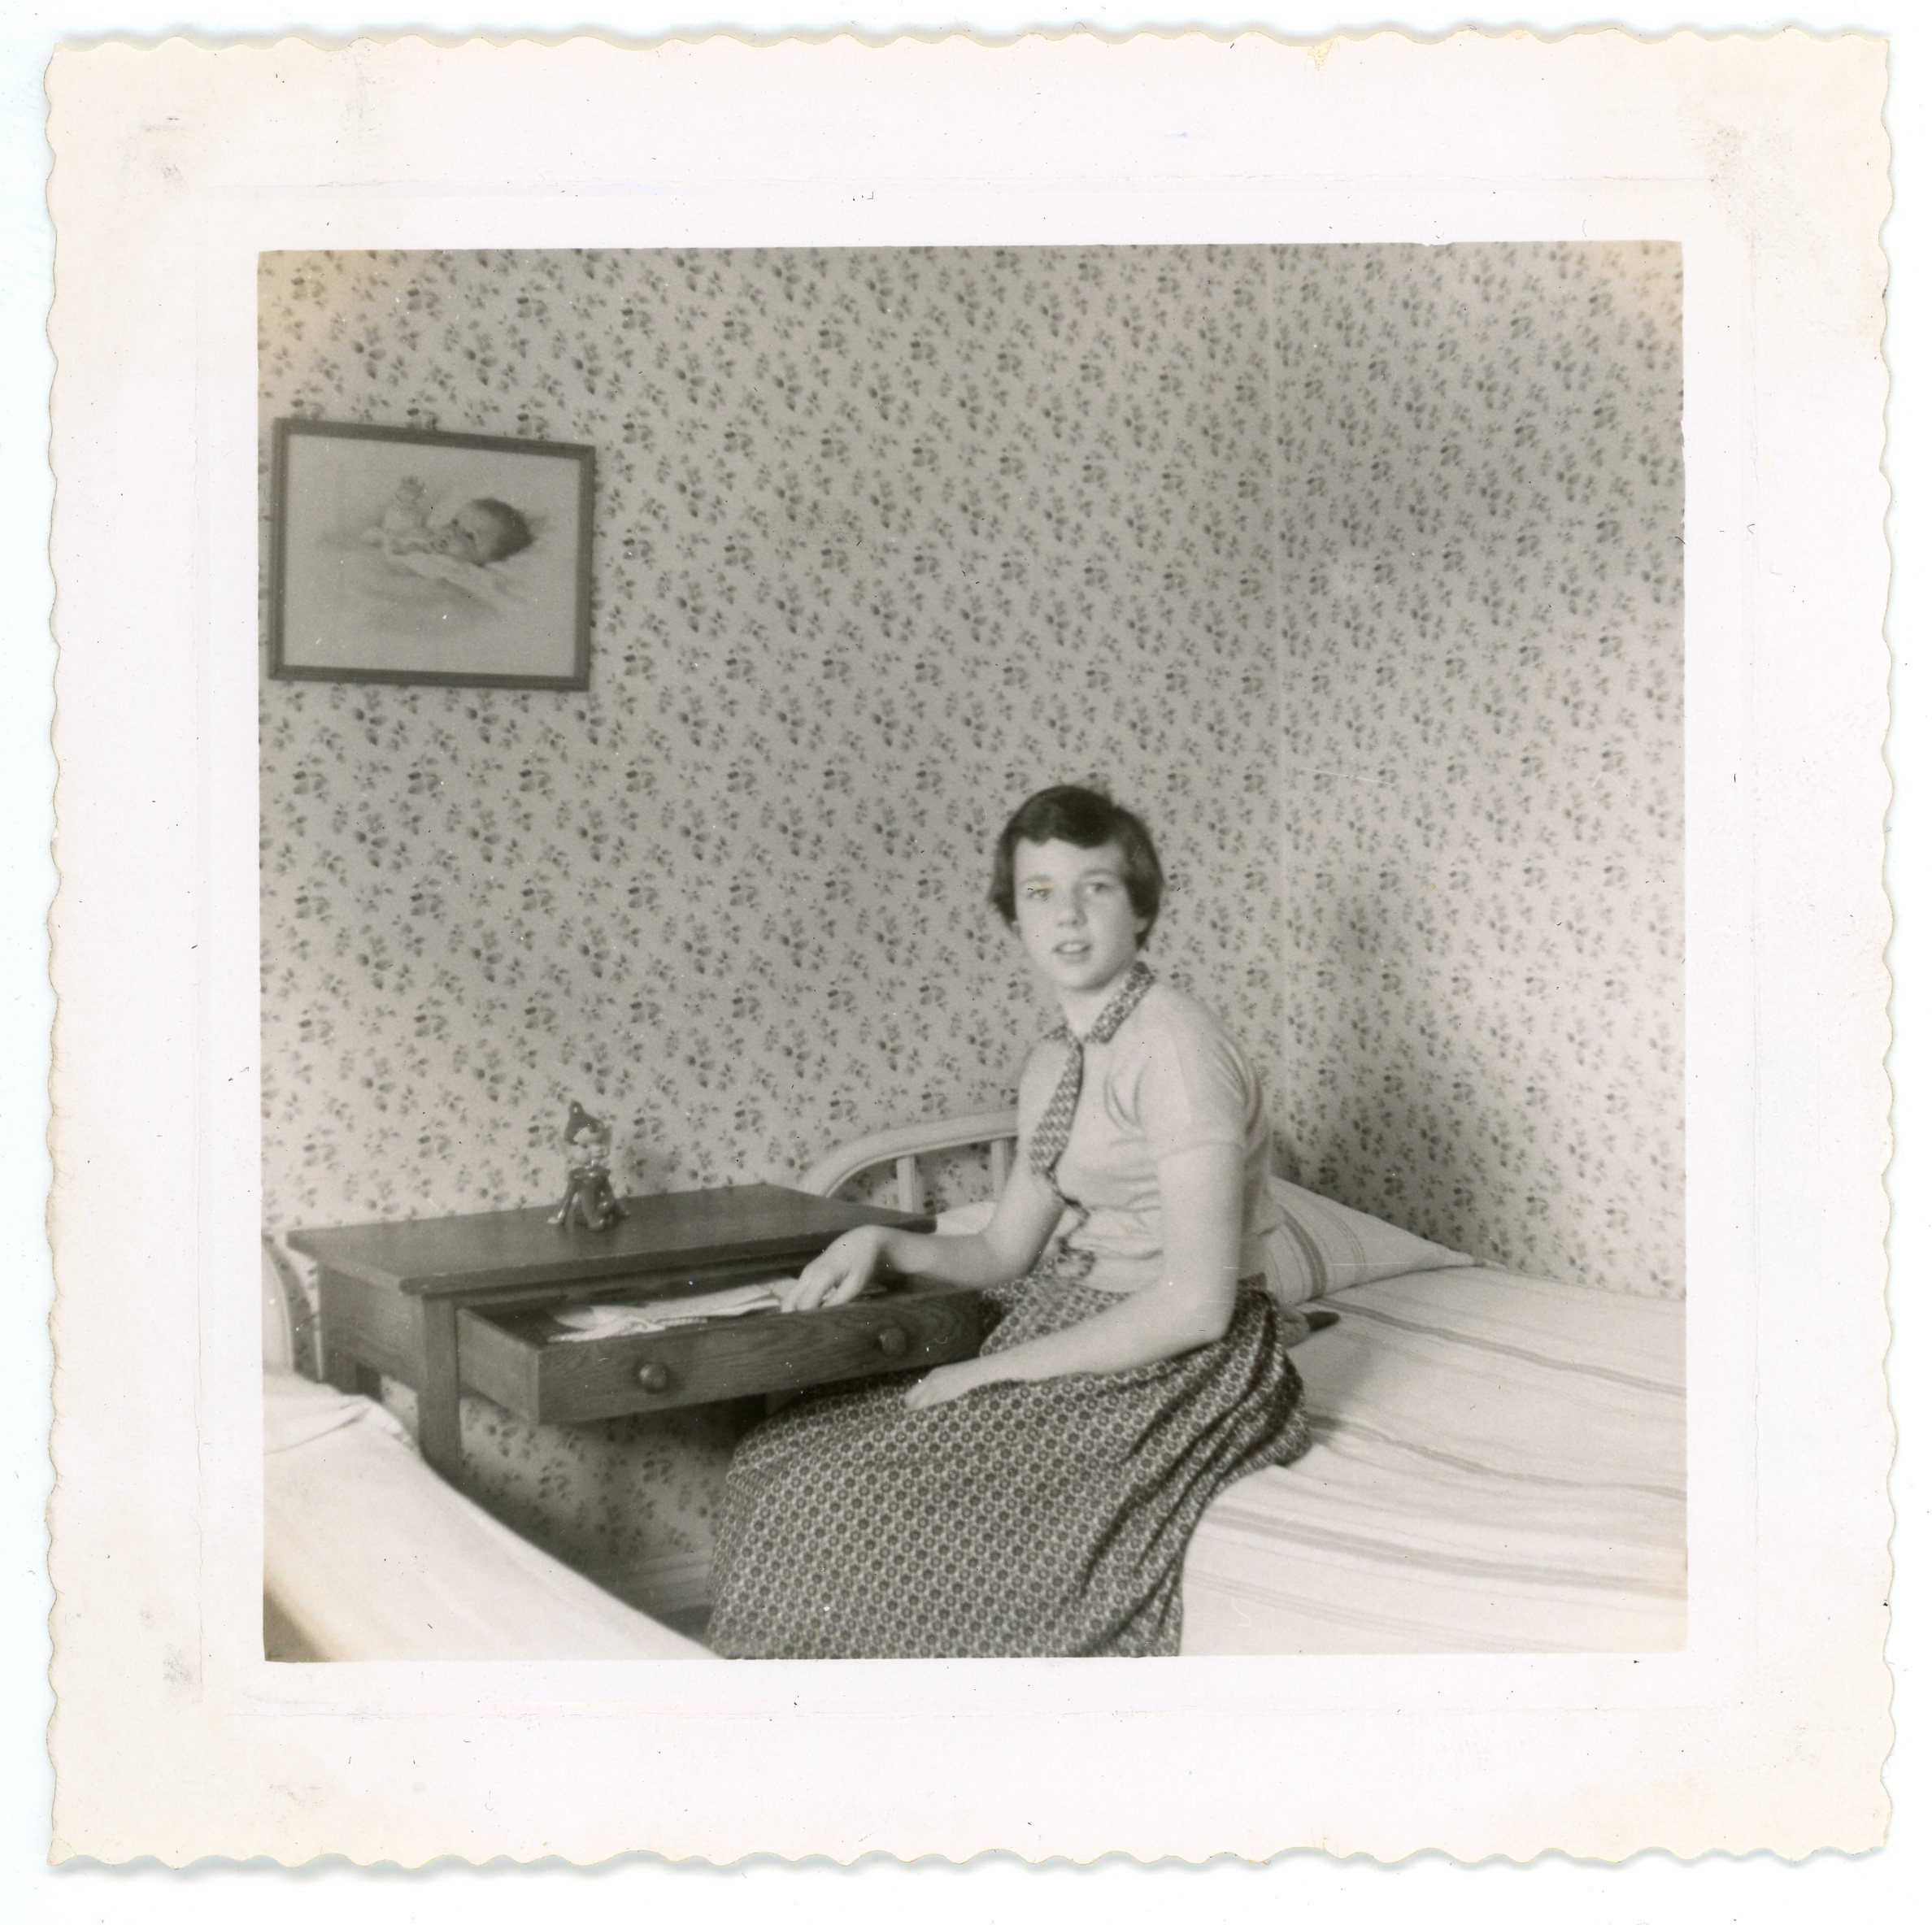 Depiction of Joanne Fortune in her dorm room, photo by Nancy Arena